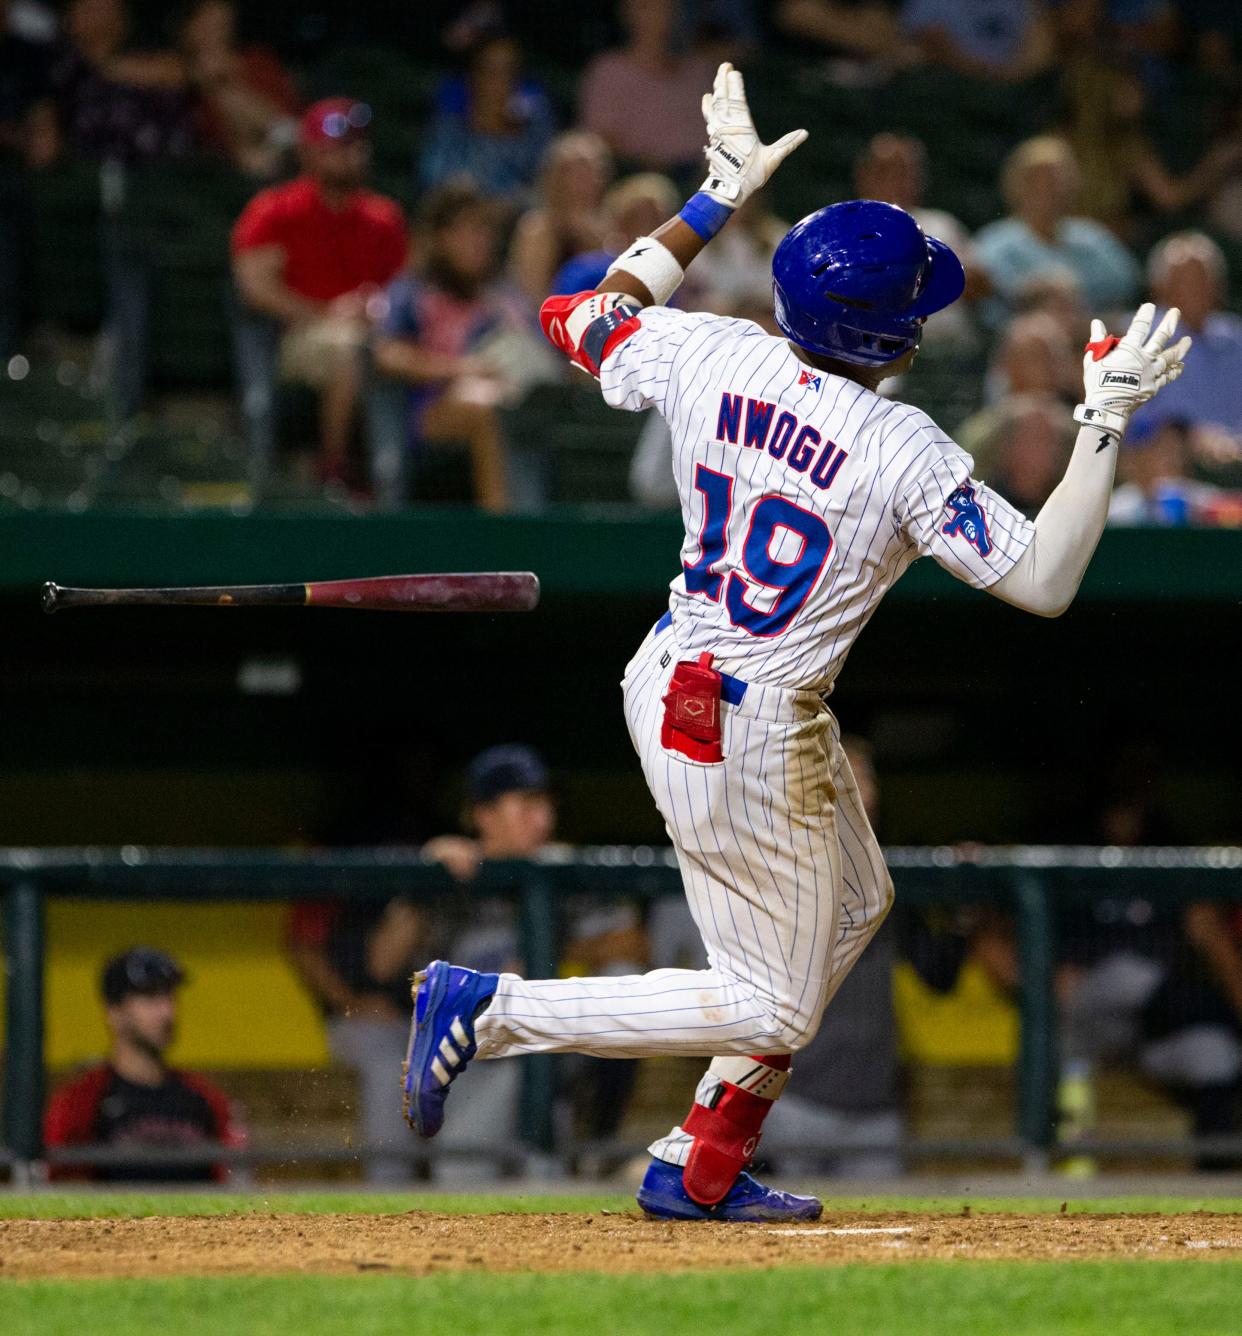 Jordan Nwogu during the South Bend Cubs v. Lake County Captains game on Thursday, July 28, 2022. Nwoguy became the first SB Cub to hit three home runs in a game last week.